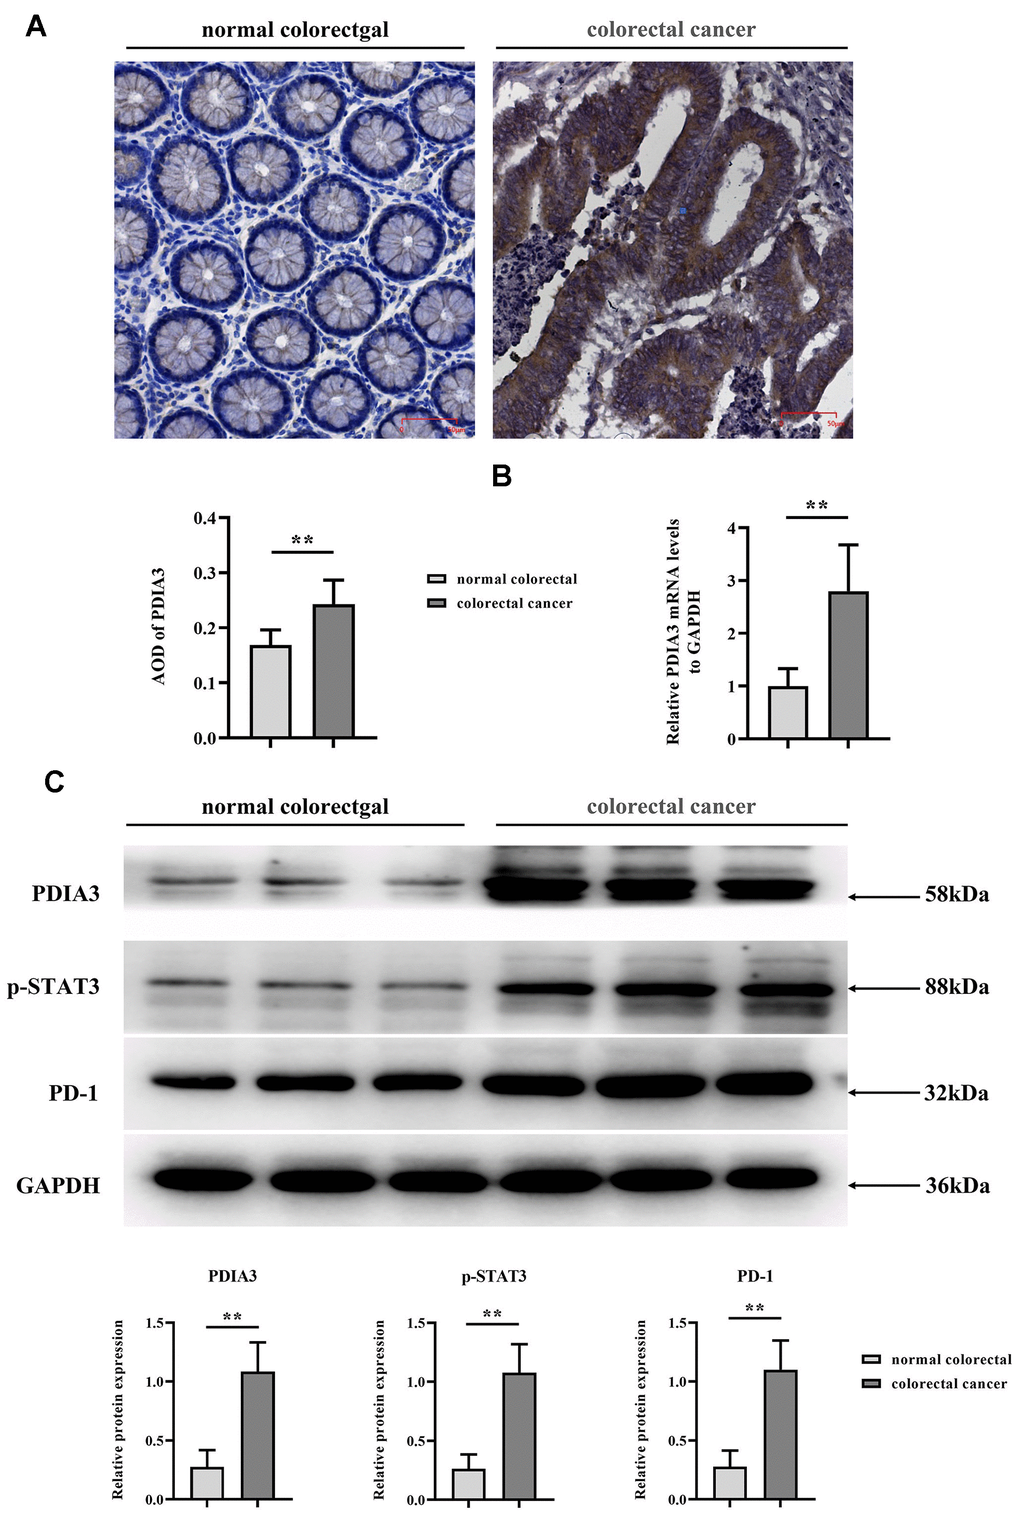 Elevated levels of PDIA3, phosphorylated STAT3 (p-STAT3), and PD-1 are present in CRC tissues. (A) Immunohistochemical assessment of PDIA3 protein in CRC and adjacent normative tissue. Statistical evaluation via T-test* *P B) RT-qPCR quantification of PDIA3 mRNA in CRC and normative tissue (n=96 pairs). Statistical evaluation via T-test,* *P C) Total protein isolation from tumor specimens with RIPA buffer, subsequently quantified via the BCA assay. Relative protein expression levels of PDIA3, p-STAT3, and PD-1 were determined after densitometric analysis from three independent samples. Statistical evaluation via T-test, * *P 